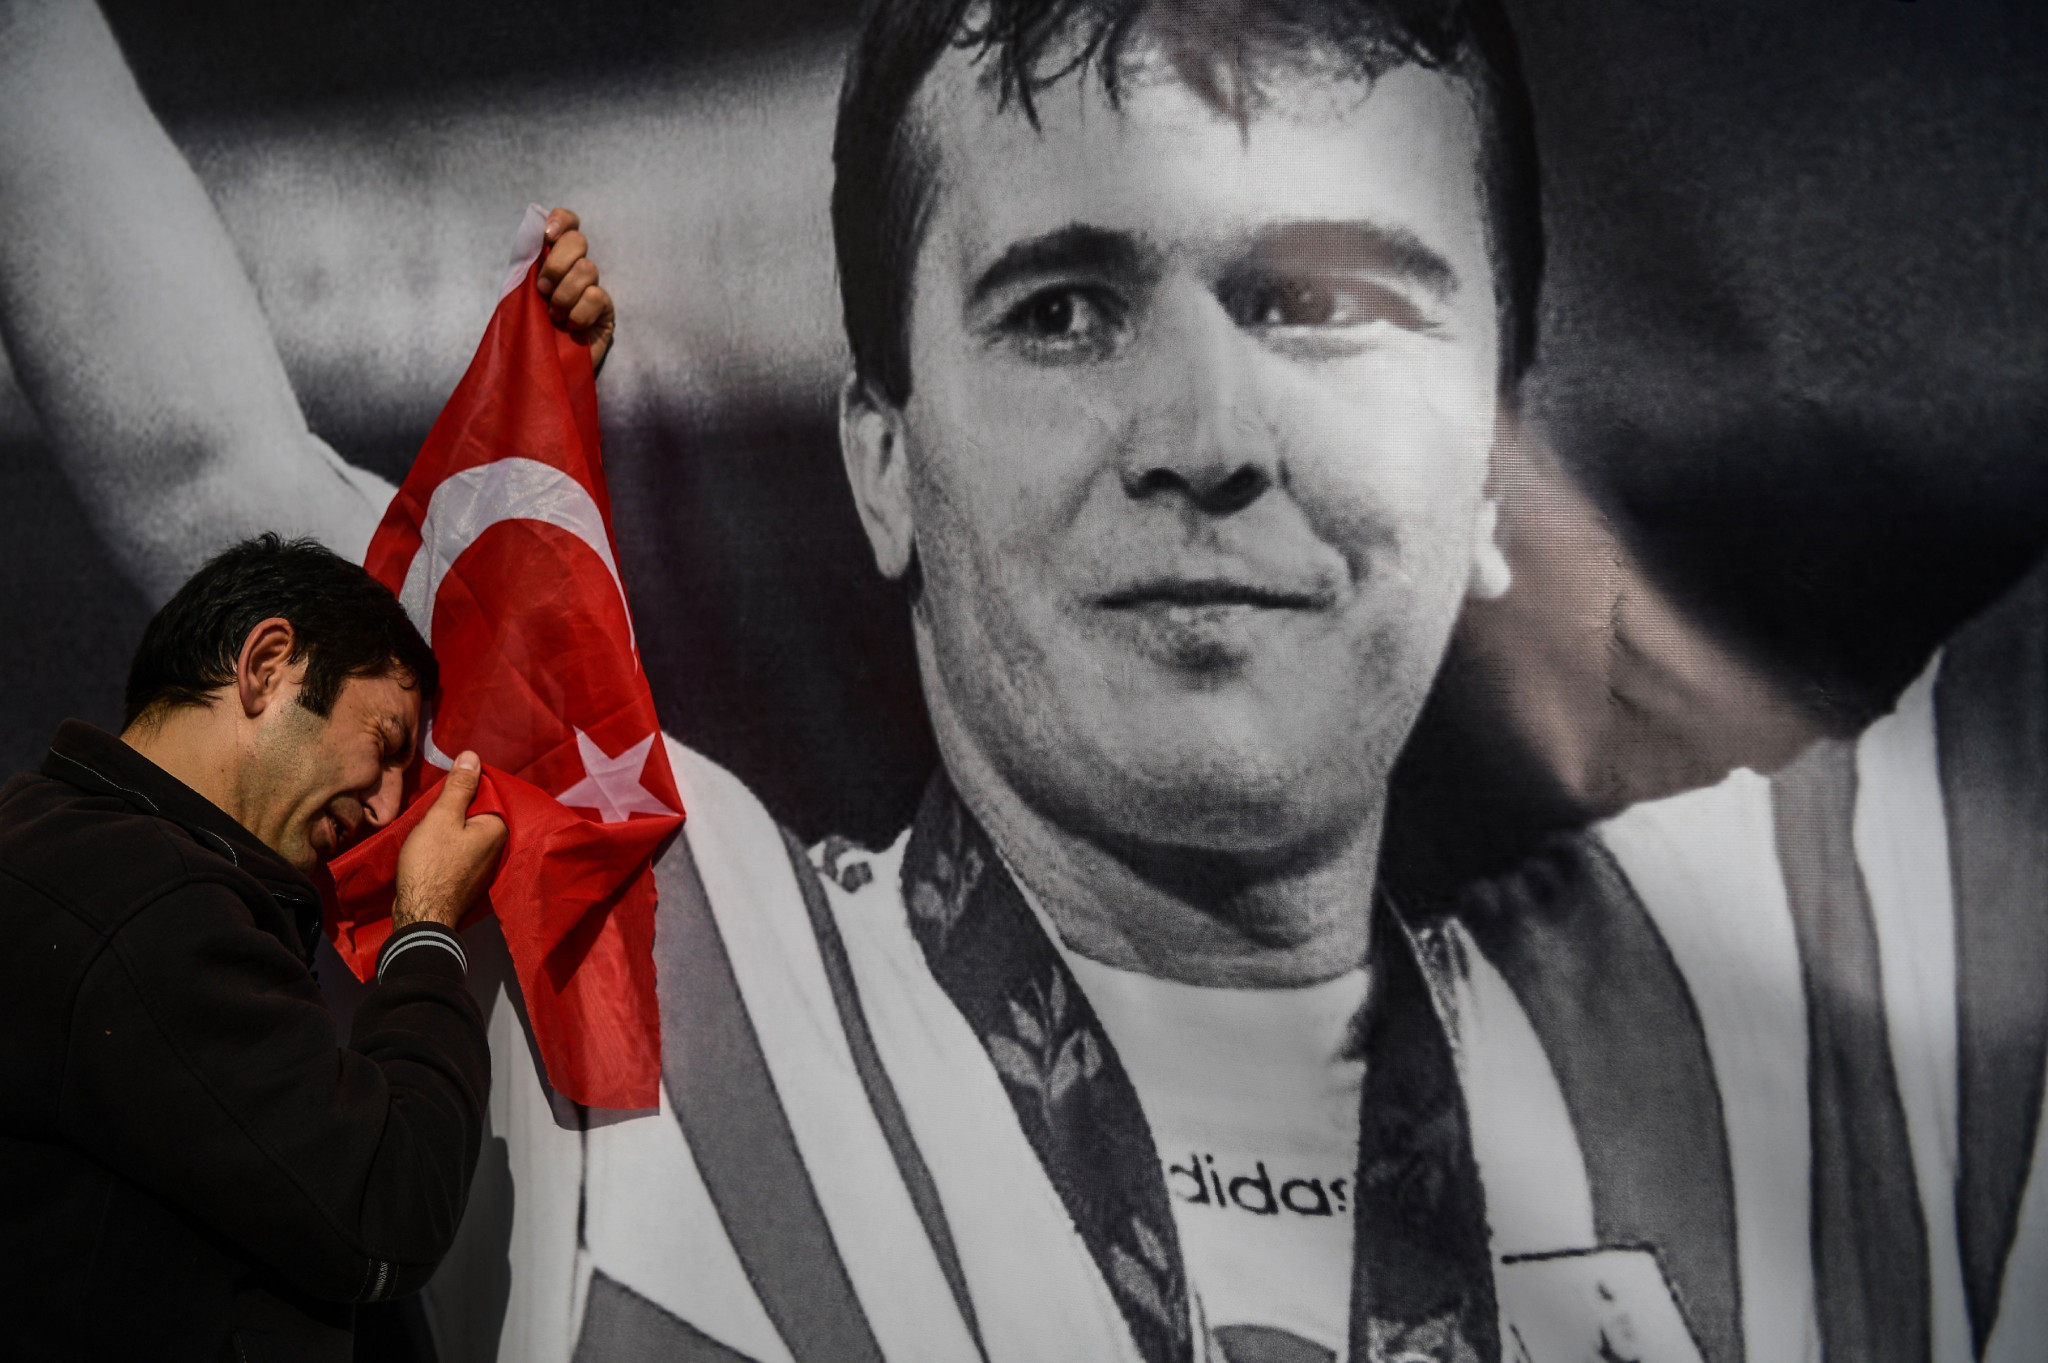 Turkey’s three-time Olympic gold medal-winning weightlifter Naim Süleymanoğlu has been exhumed in Istanbul as part of a paternity lawsuit ©Getty Images